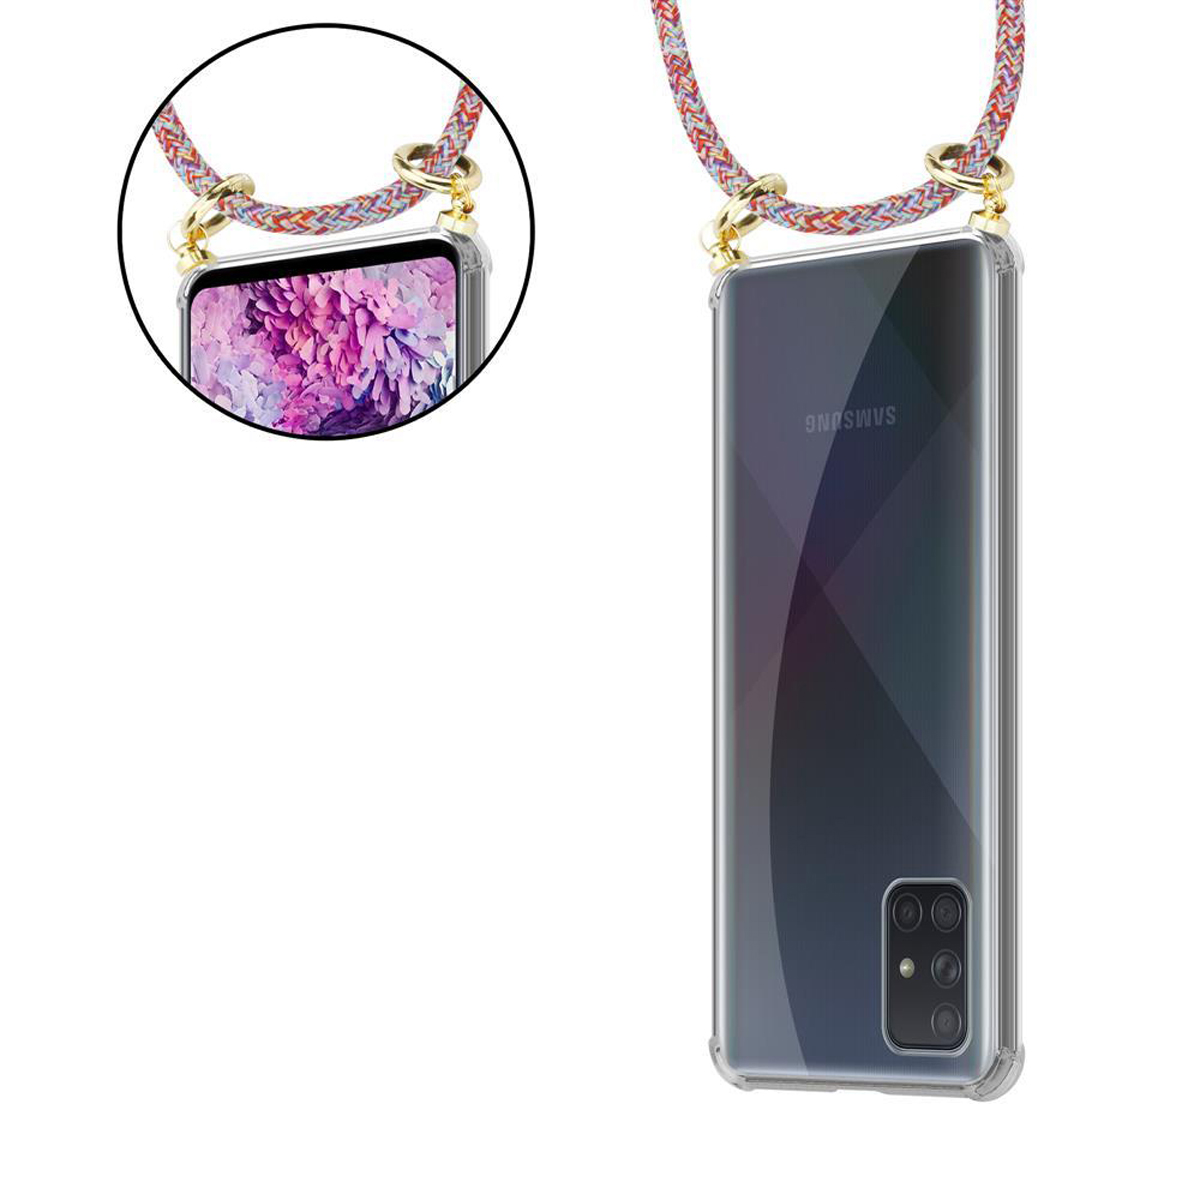 CADORABO Handy und 4G Backcover, Kette Band / Kordel mit Ringen, Hülle, A51 M40s, Gold PARROT Galaxy Samsung, COLORFUL abnehmbarer